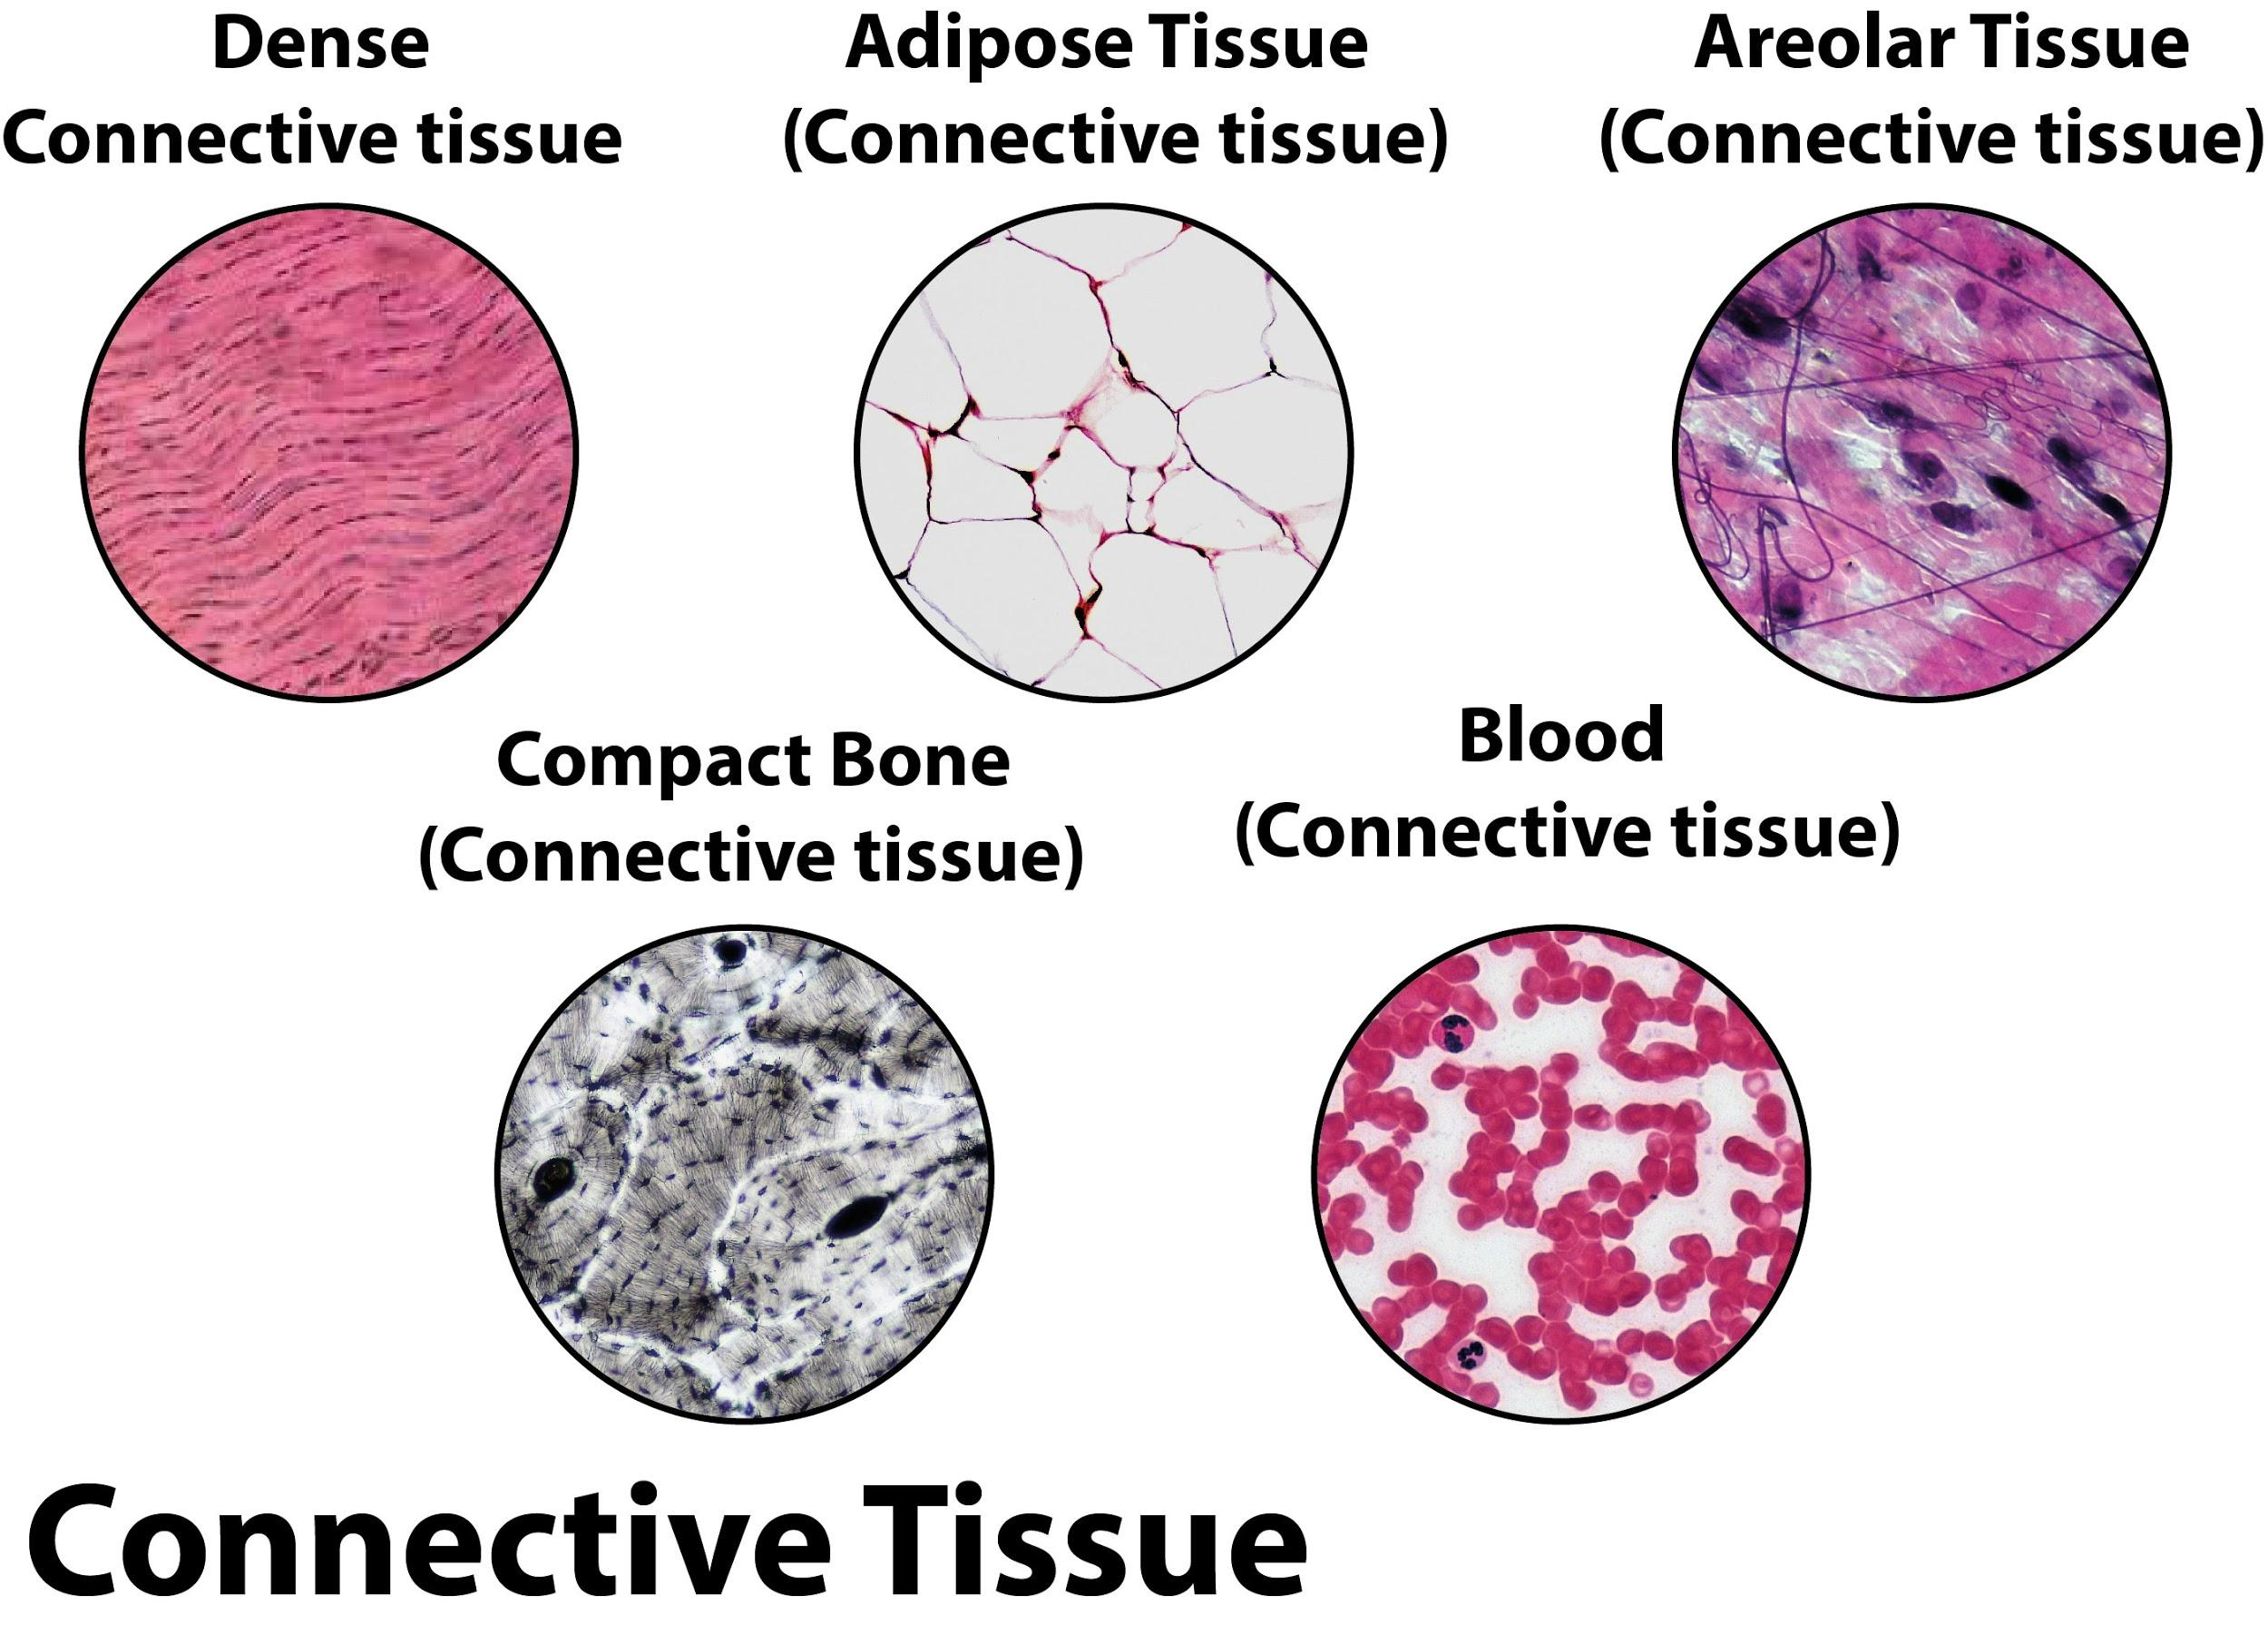 Give the characteristics of connective tissue.